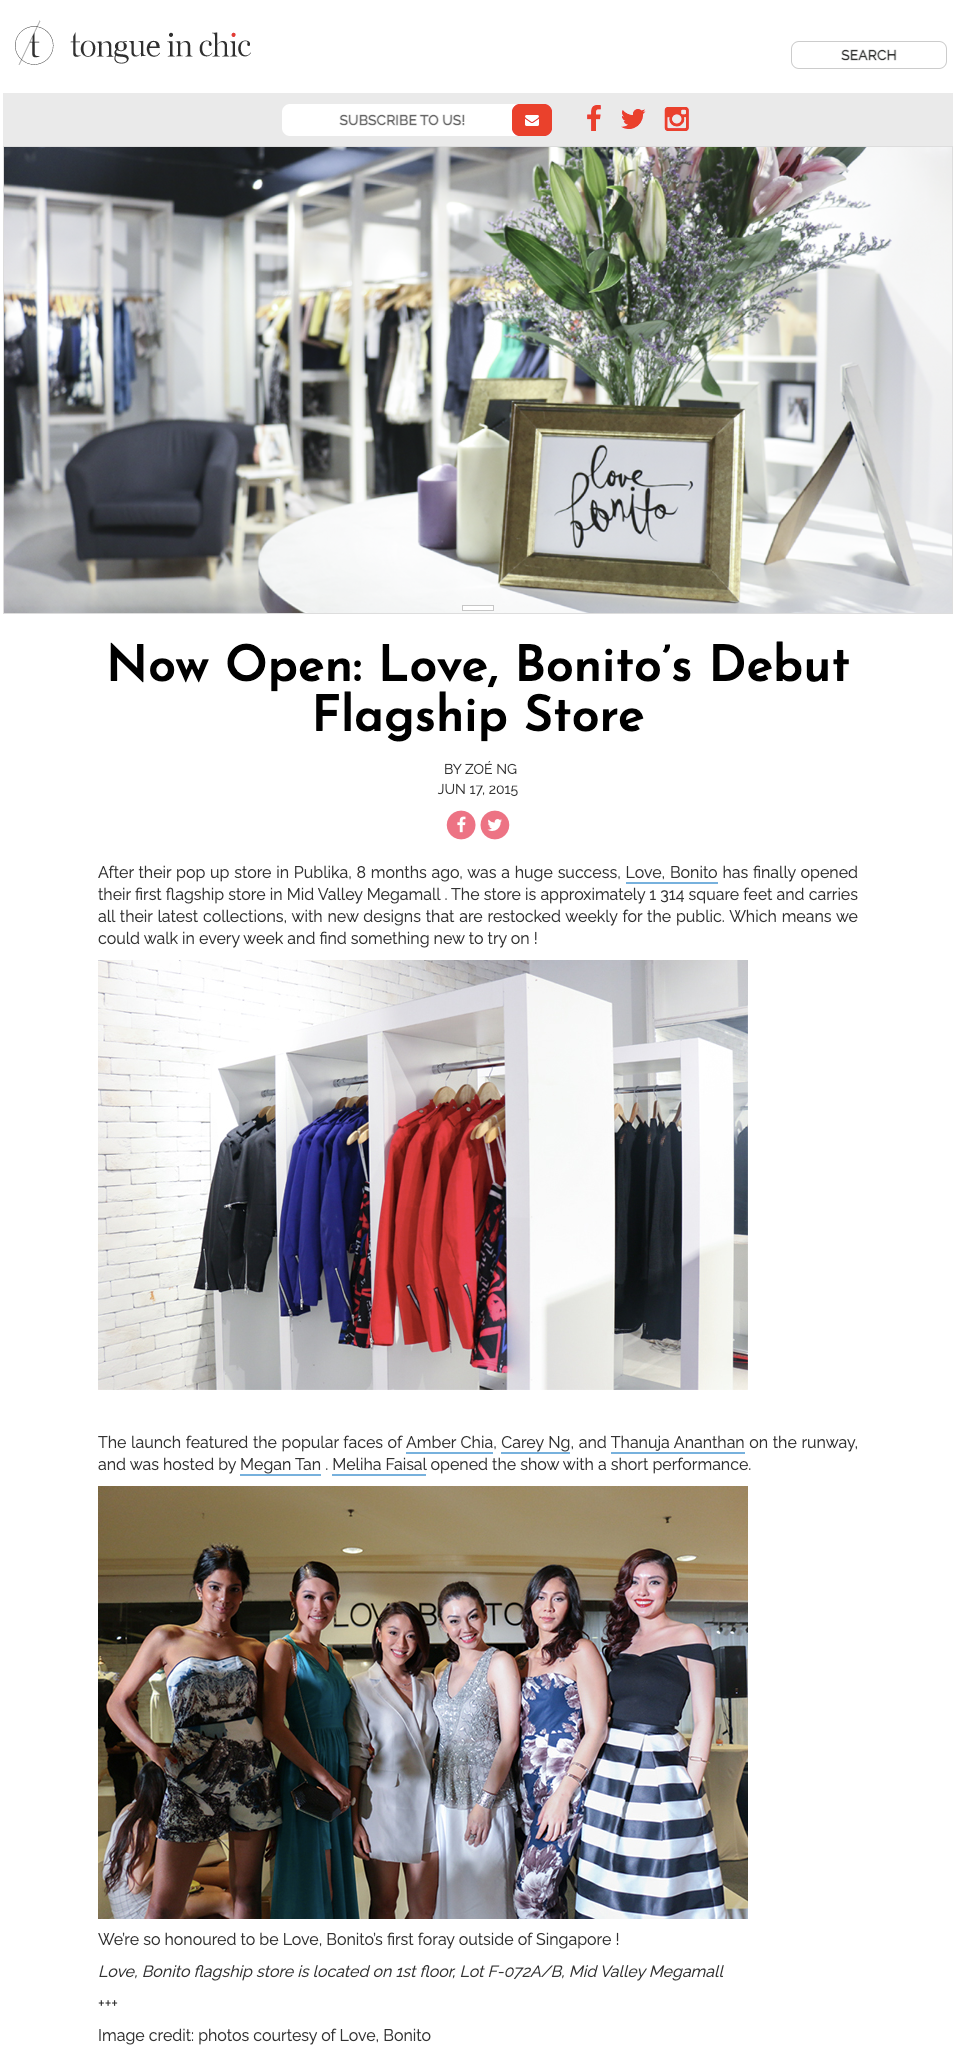 Now-open-Love-Bonito-s-debut-flagship-store.png